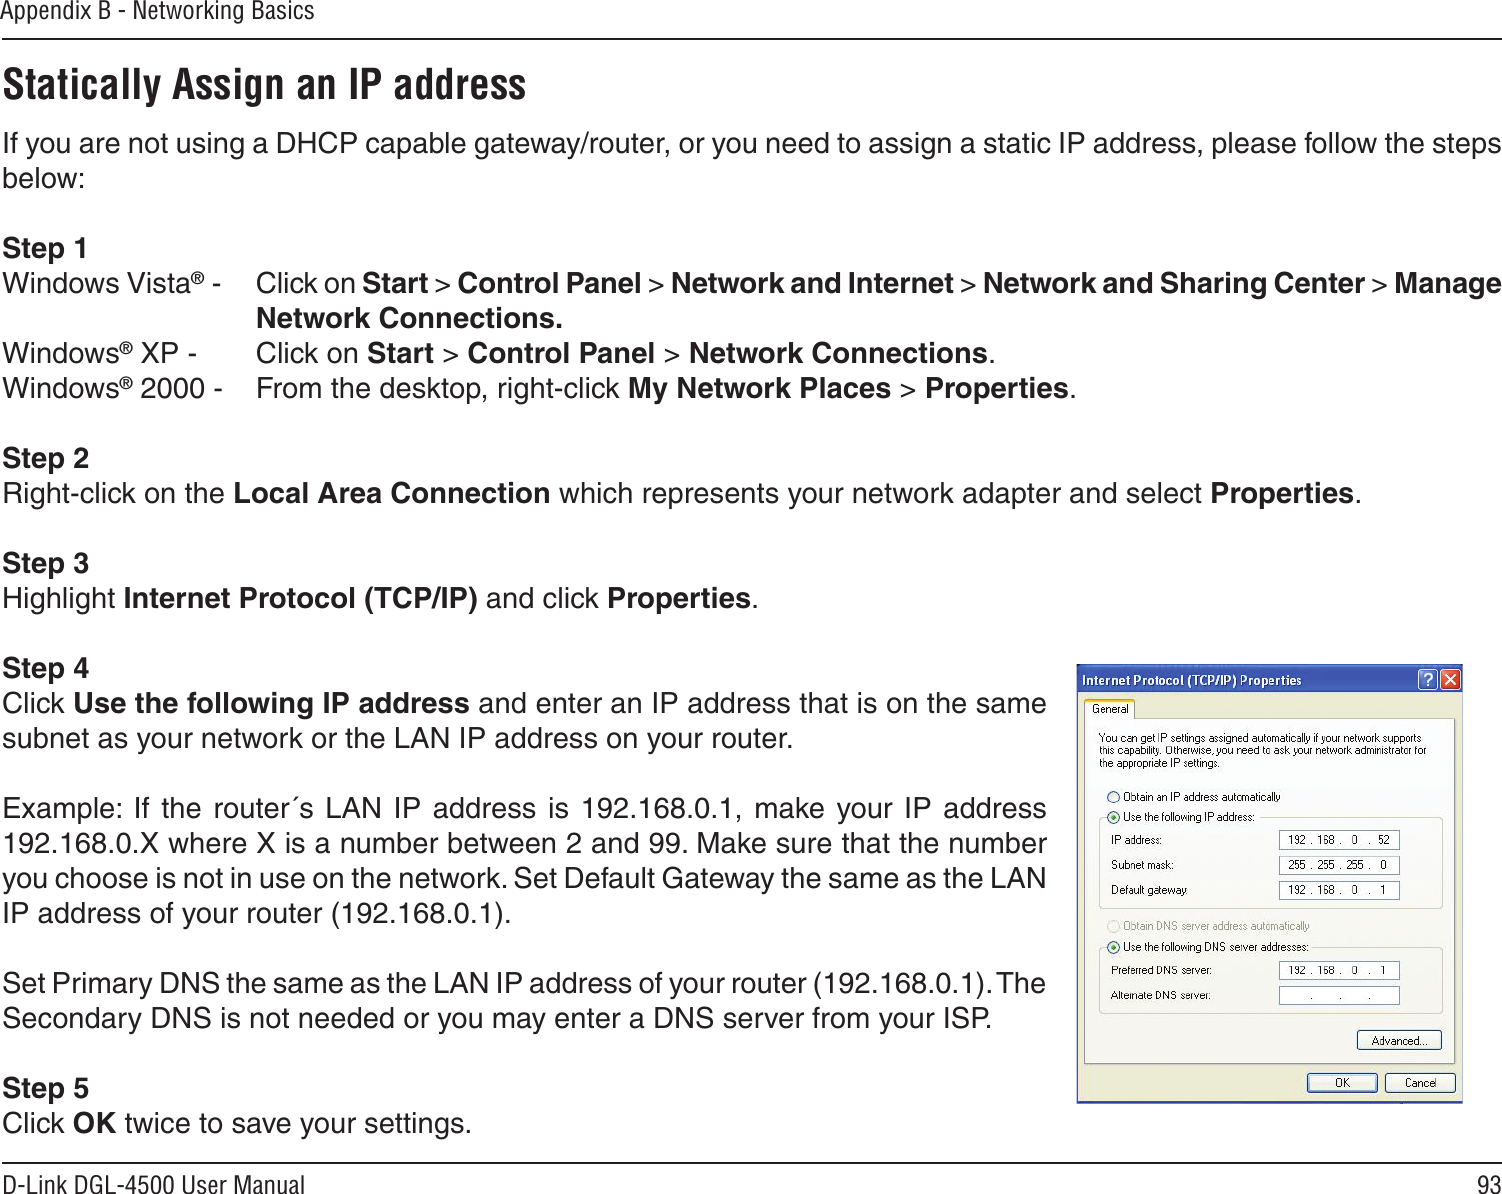 93D-Link DGL-4500 User ManualAppendix B - Networking BasicsStatically Assign an IP addressIf you are not using a DHCP capable gateway/router, or you need to assign a static IP address, please follow the steps below:Step 1Windows Vista® -  Click on Start &gt; Control Panel &gt; Network and Internet &gt; Network and Sharing Center &gt; Manage Network Connections.Windows® XP -  Click on Start &gt; Control Panel &gt; Network Connections.Windows® 2000 -  From the desktop, right-click My Network Places &gt; Properties.Step 2Right-click on the Local Area Connection which represents your network adapter and select Properties.Step 3Highlight Internet Protocol (TCP/IP) and click Properties.Step 4Click Use the following IP address and enter an IP address that is on the same subnet as your network or the LAN IP address on your router. Example:  If the router´s  LAN  IP  address is  192.168.0.1,  make your IP  address 192.168.0.X where X is a number between 2 and 99. Make sure that the number you choose is not in use on the network. Set Default Gateway the same as the LAN IP address of your router (192.168.0.1). Set Primary DNS the same as the LAN IP address of your router (192.168.0.1). The Secondary DNS is not needed or you may enter a DNS server from your ISP.Step 5Click OK twice to save your settings.